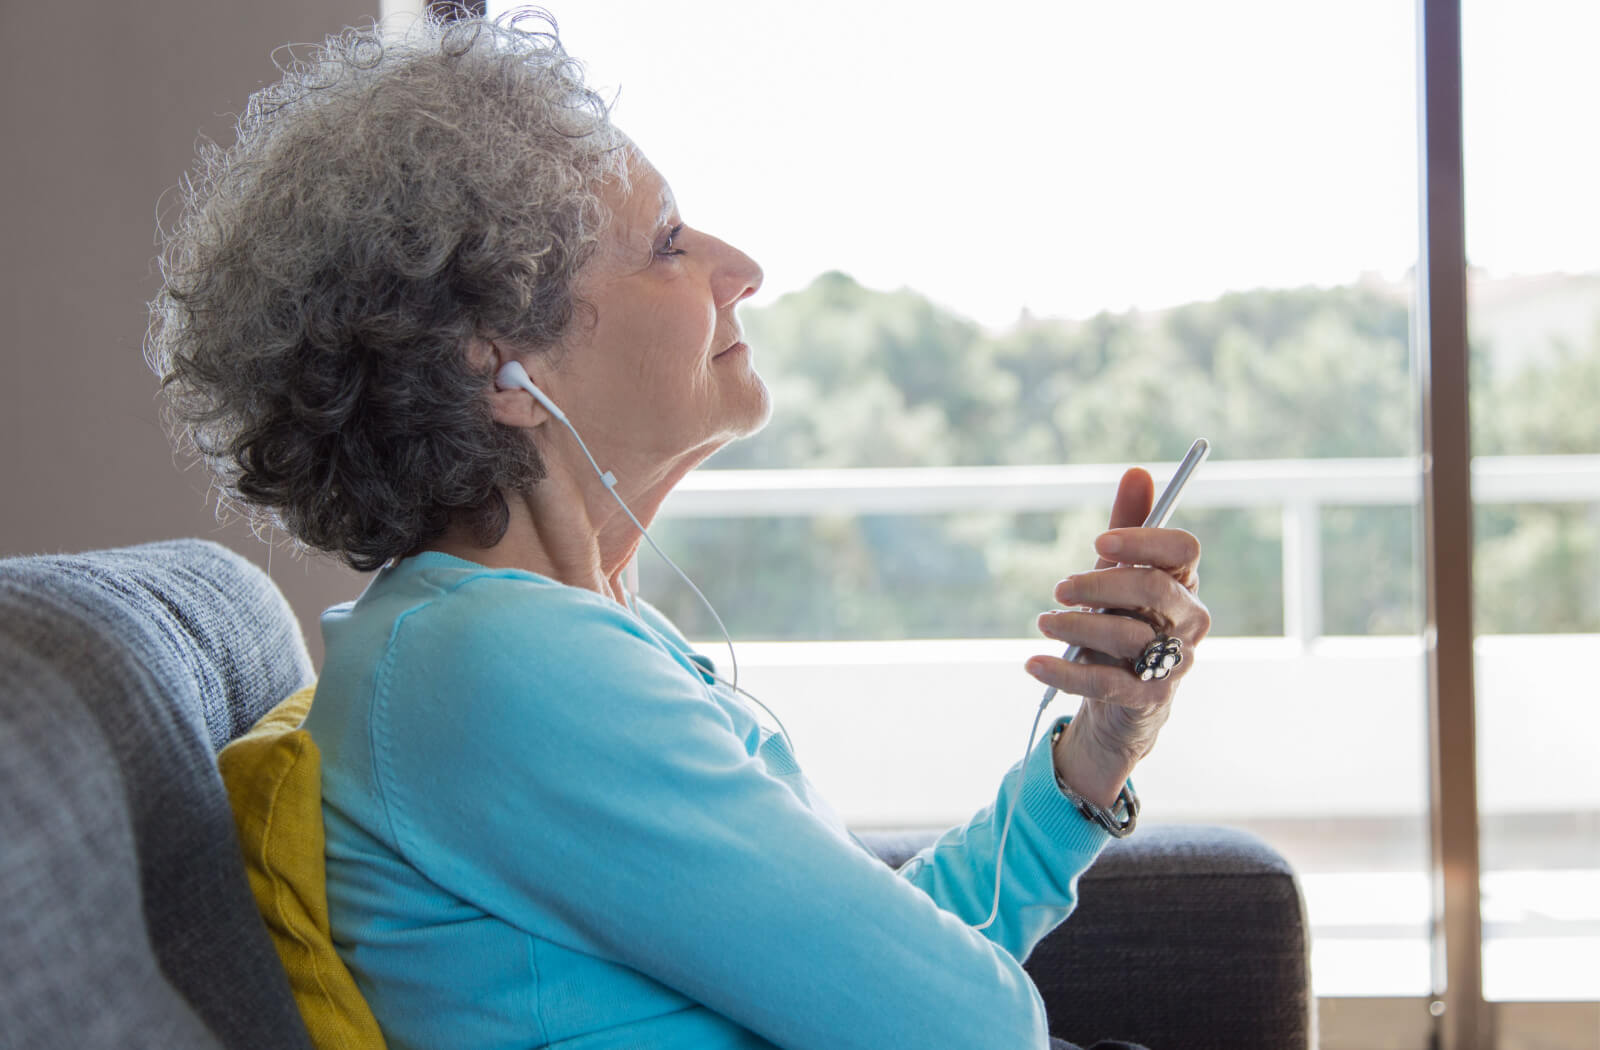 A senior woman with curly hair happily listening to music.